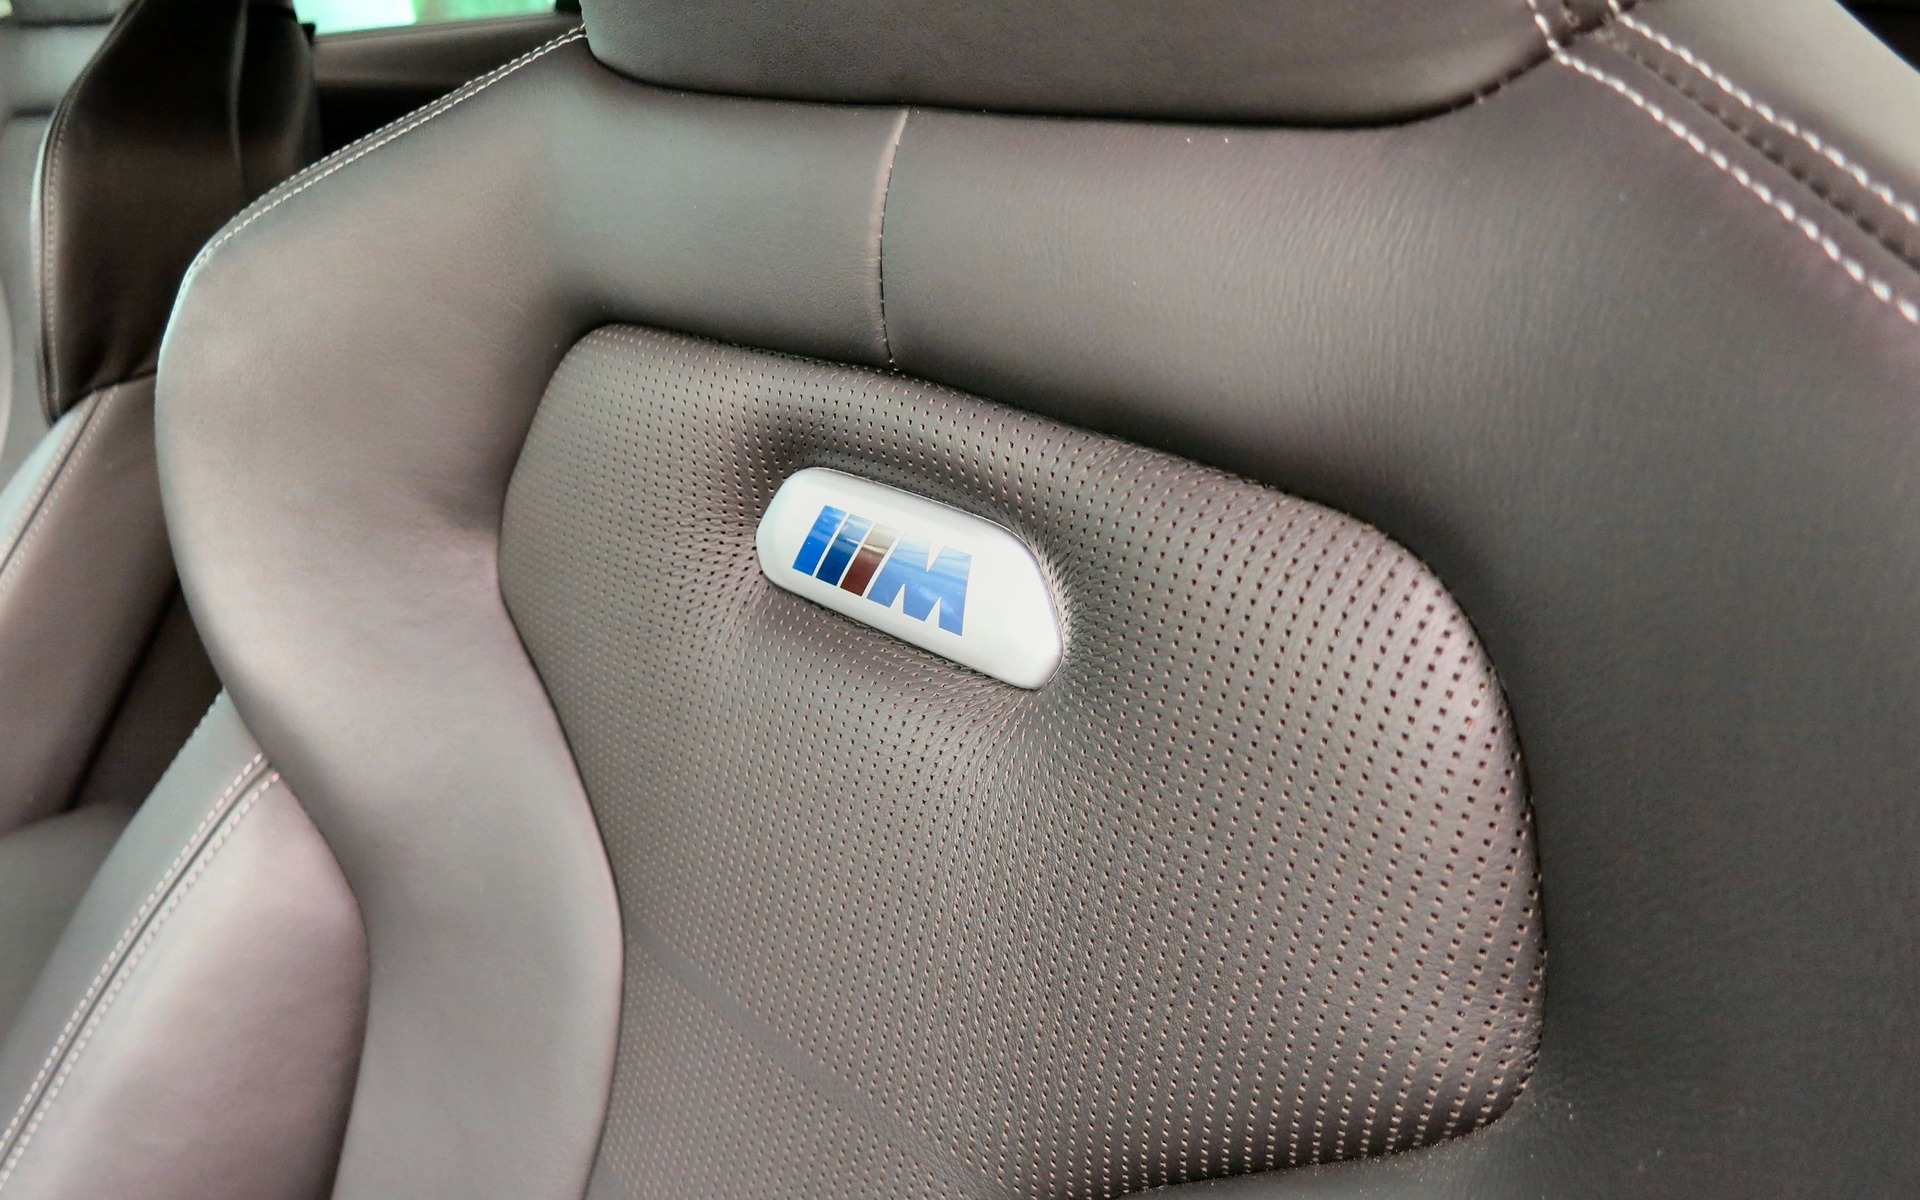 The M-logo sport seats offer power inflatable side bolsters.